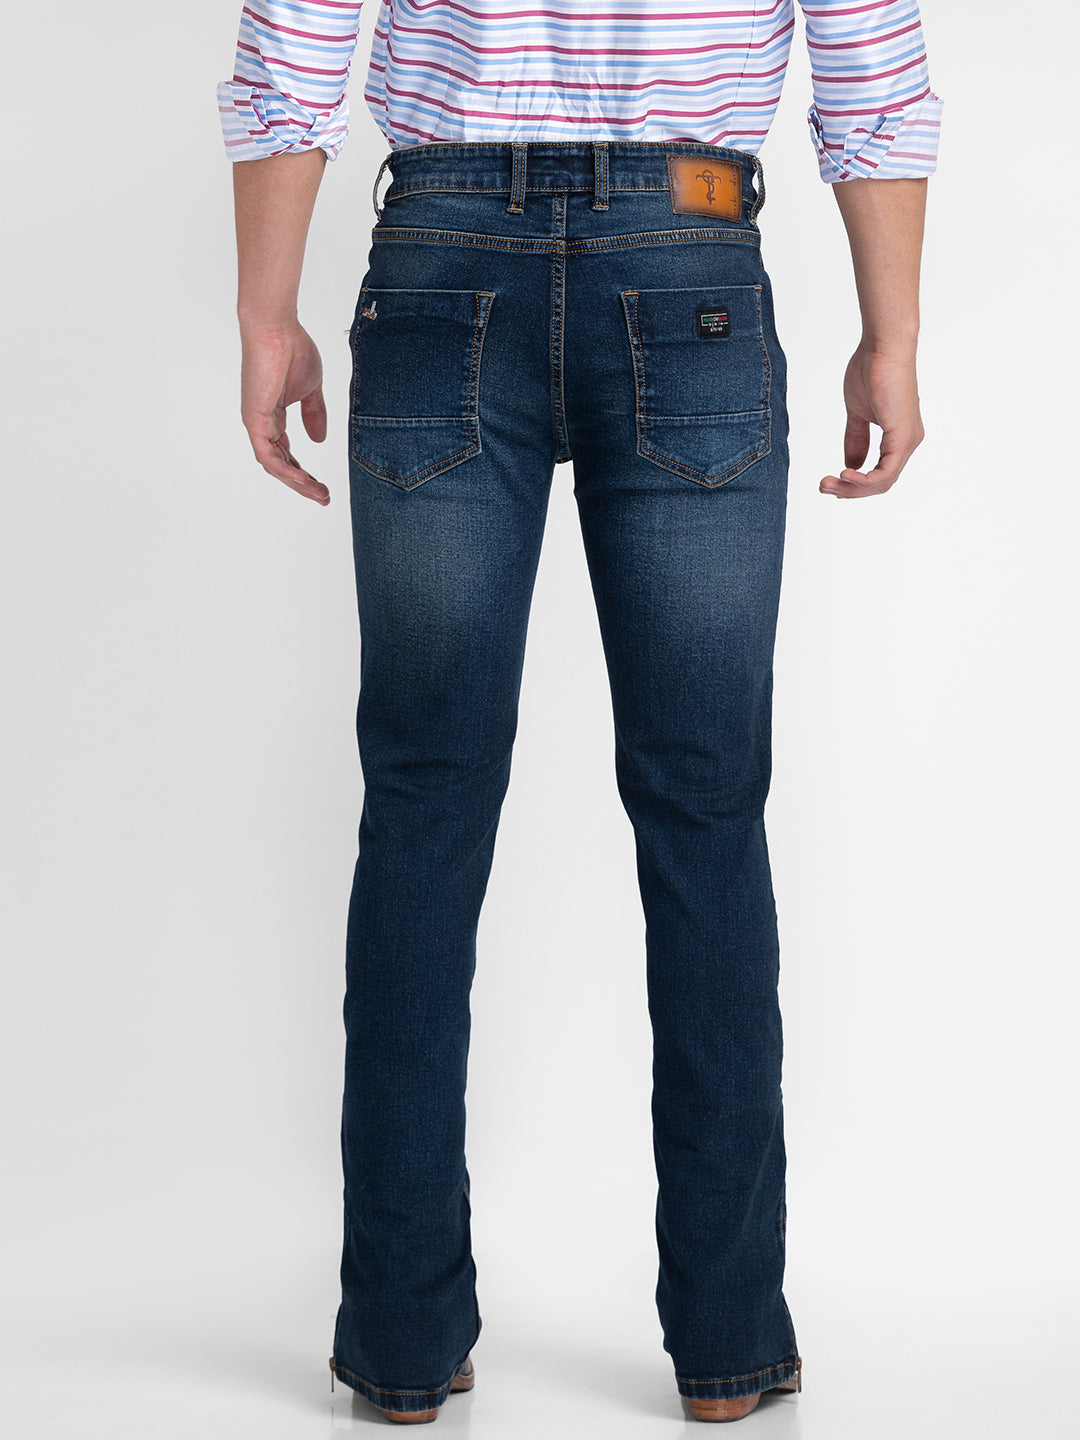 Dark Blue Distressed Bootcut Jeans with Zipper Bottoms